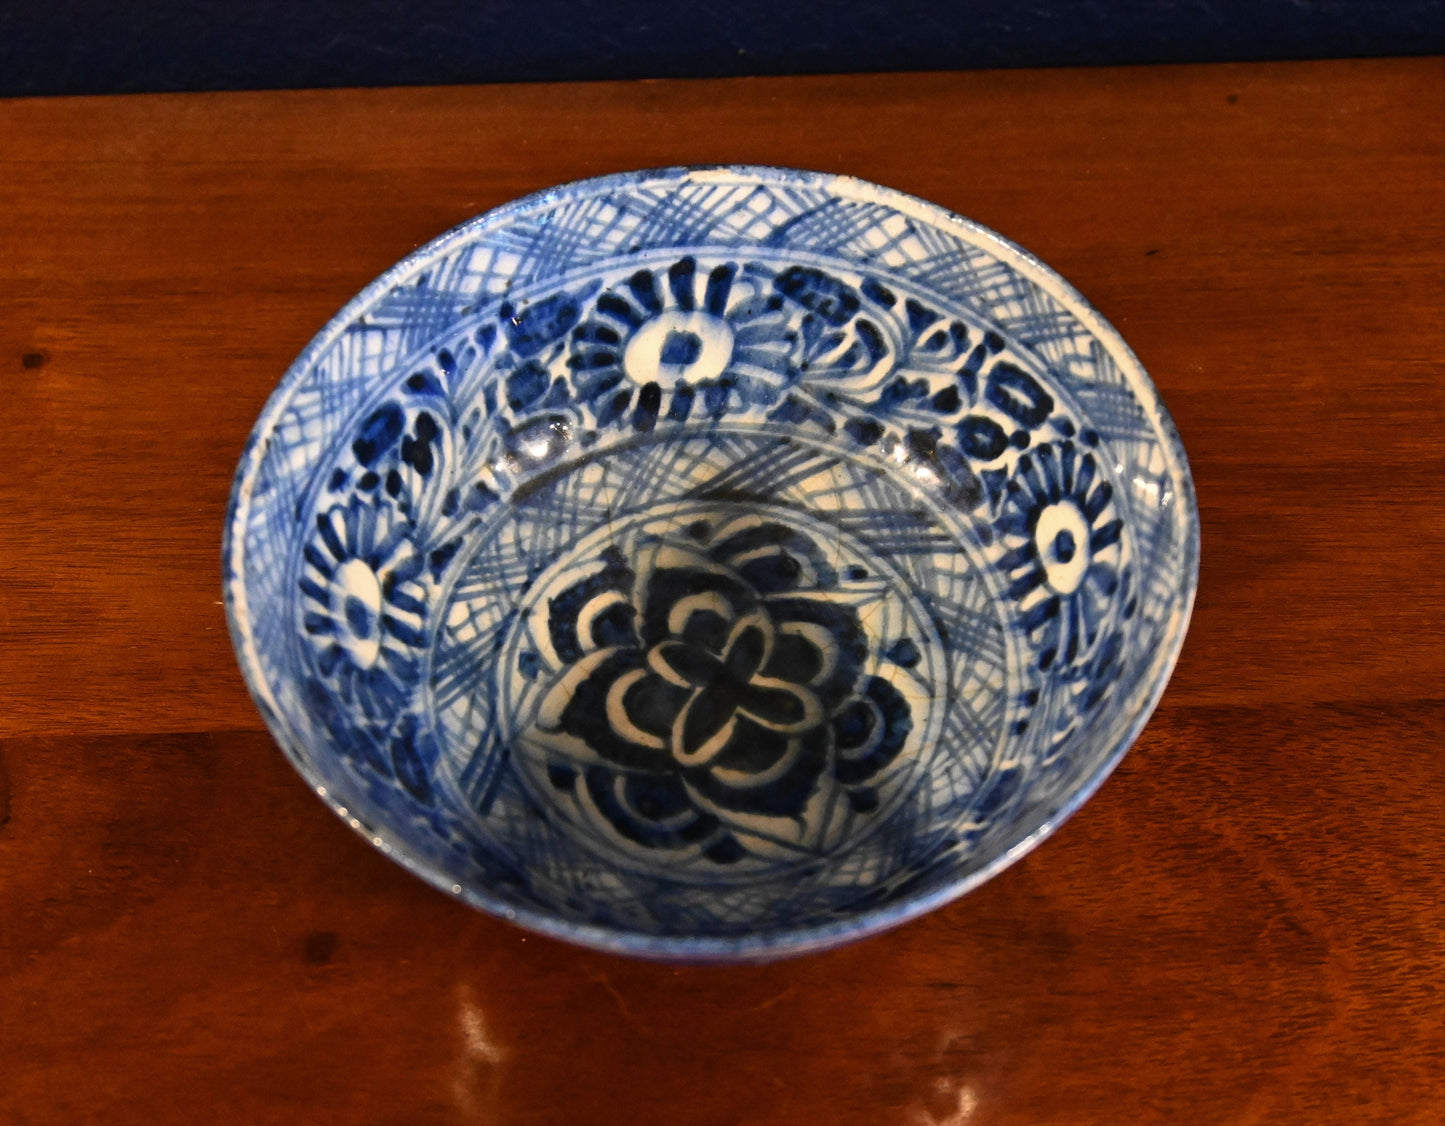 Stunning Persian 19th Century, Ceramic Bowl Kashan Blue and white floral 7 1/8 inches (18.09 cm) in Diameter